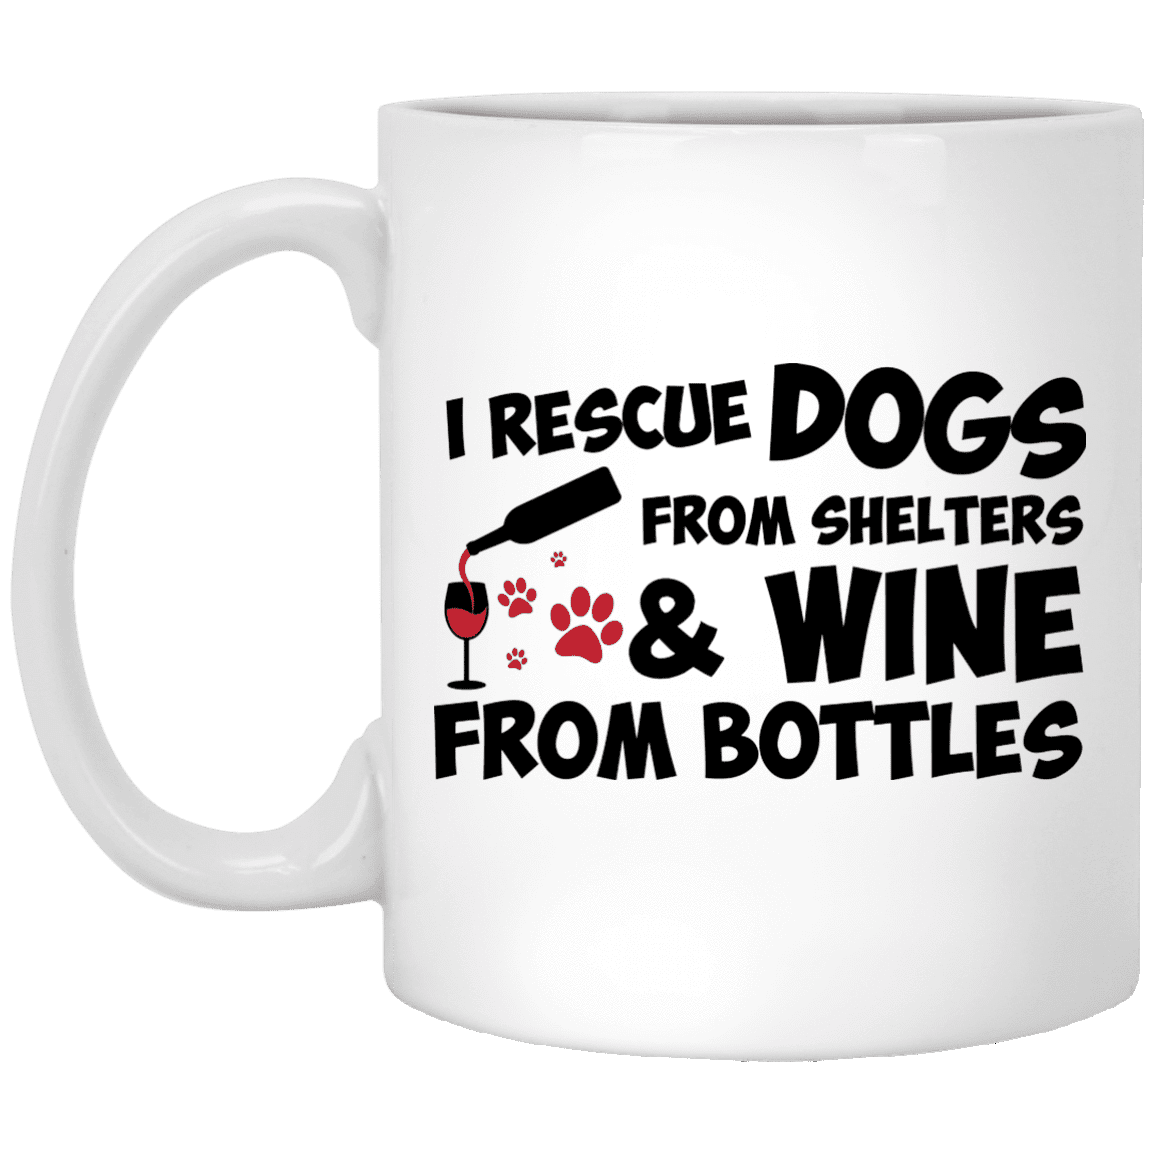 I Rescue Dogs And Wine - Mugs.